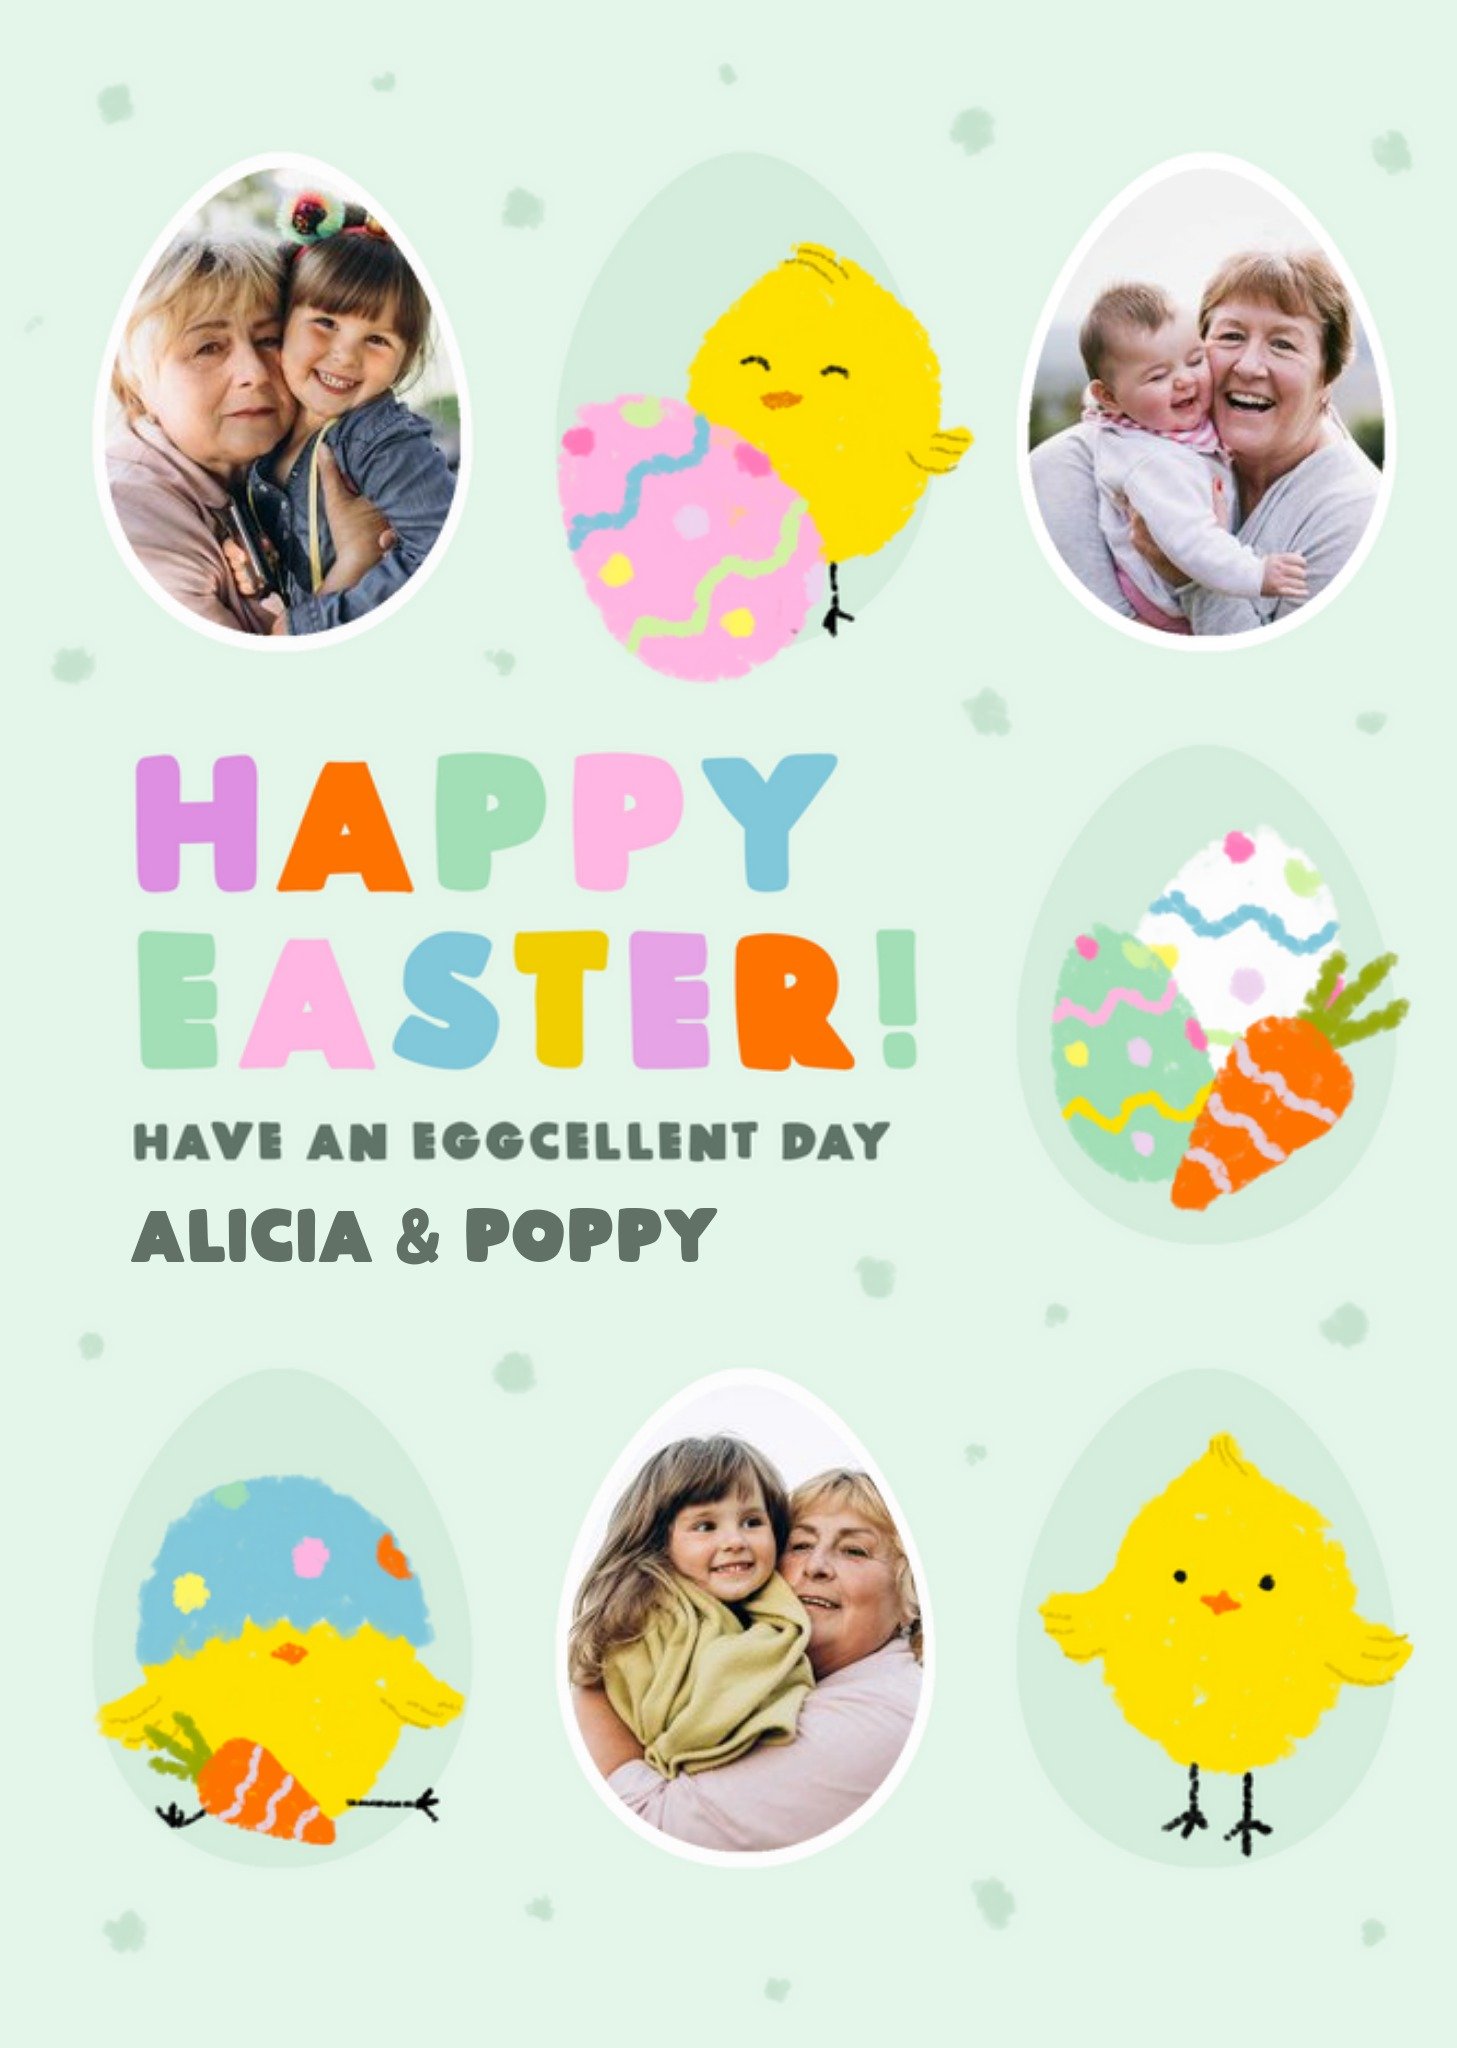 Moonpig Illustration Of Chicks And Decorated Eggs Happy Easter Photo Upload Card, Large